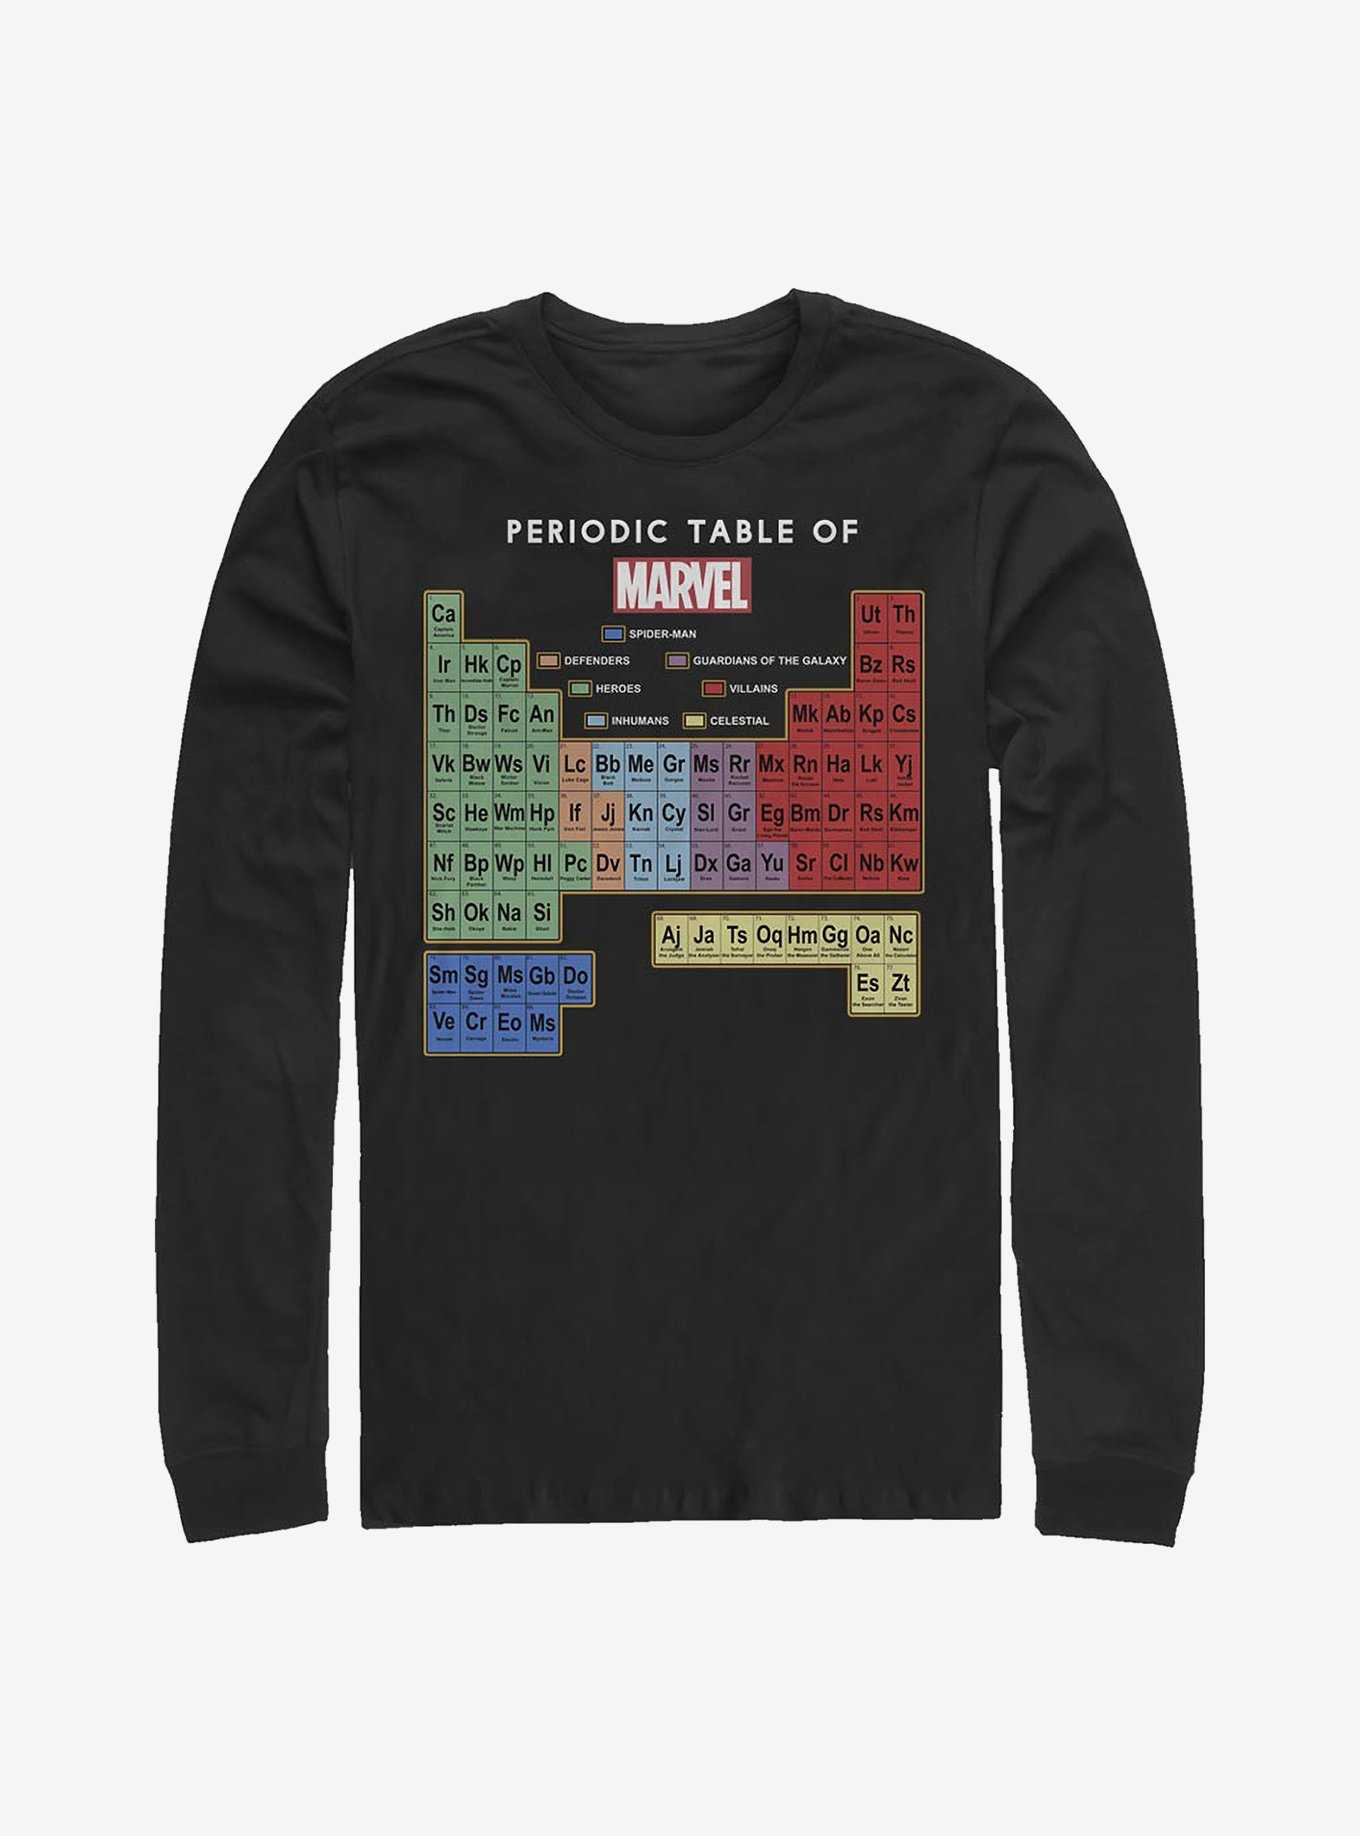 Marvel Periodic Table Of Marvel Long-Sleeve T-Shirt, , hi-res